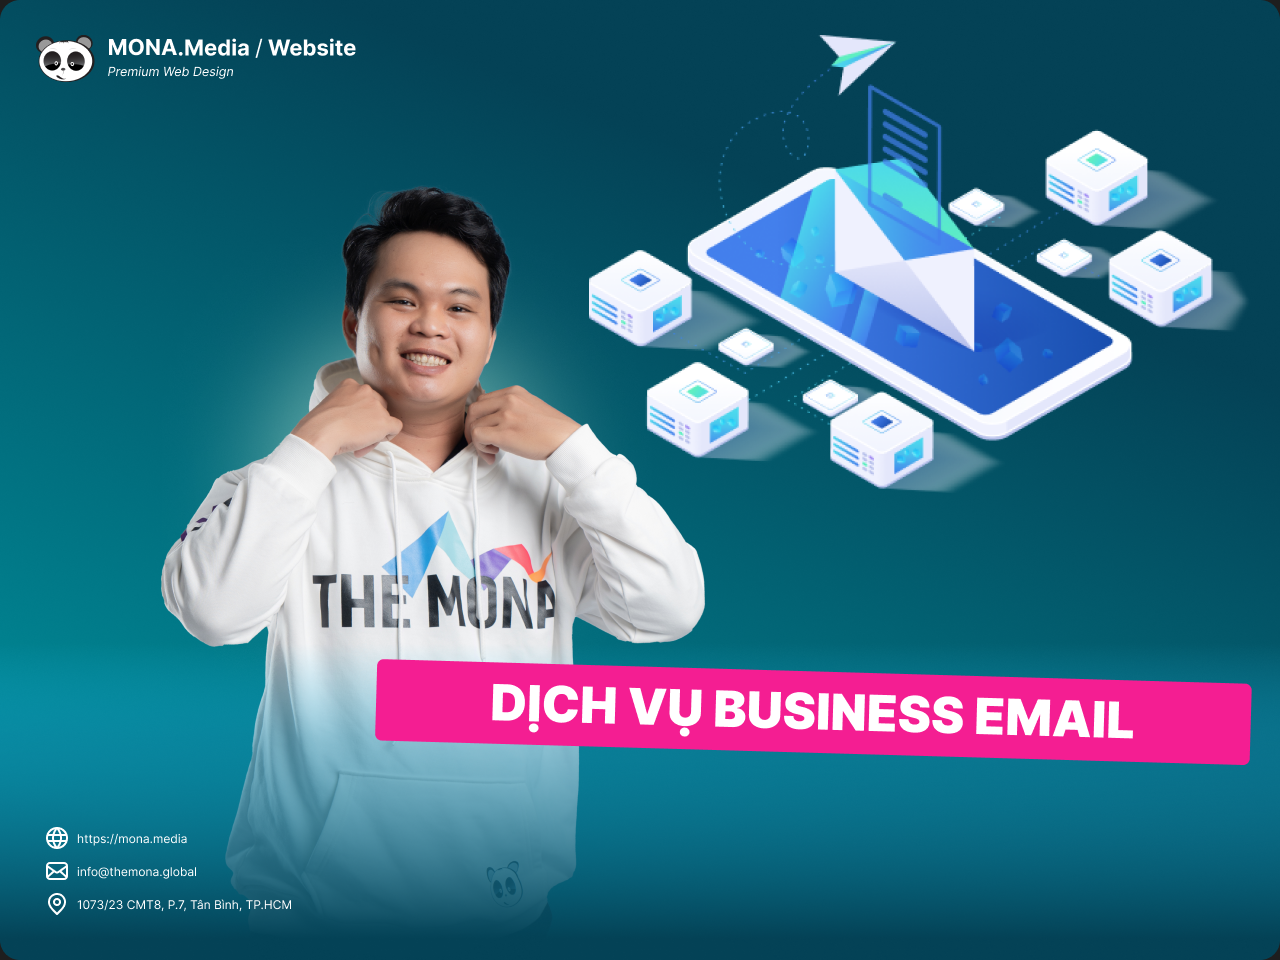 Dịch vụ business email